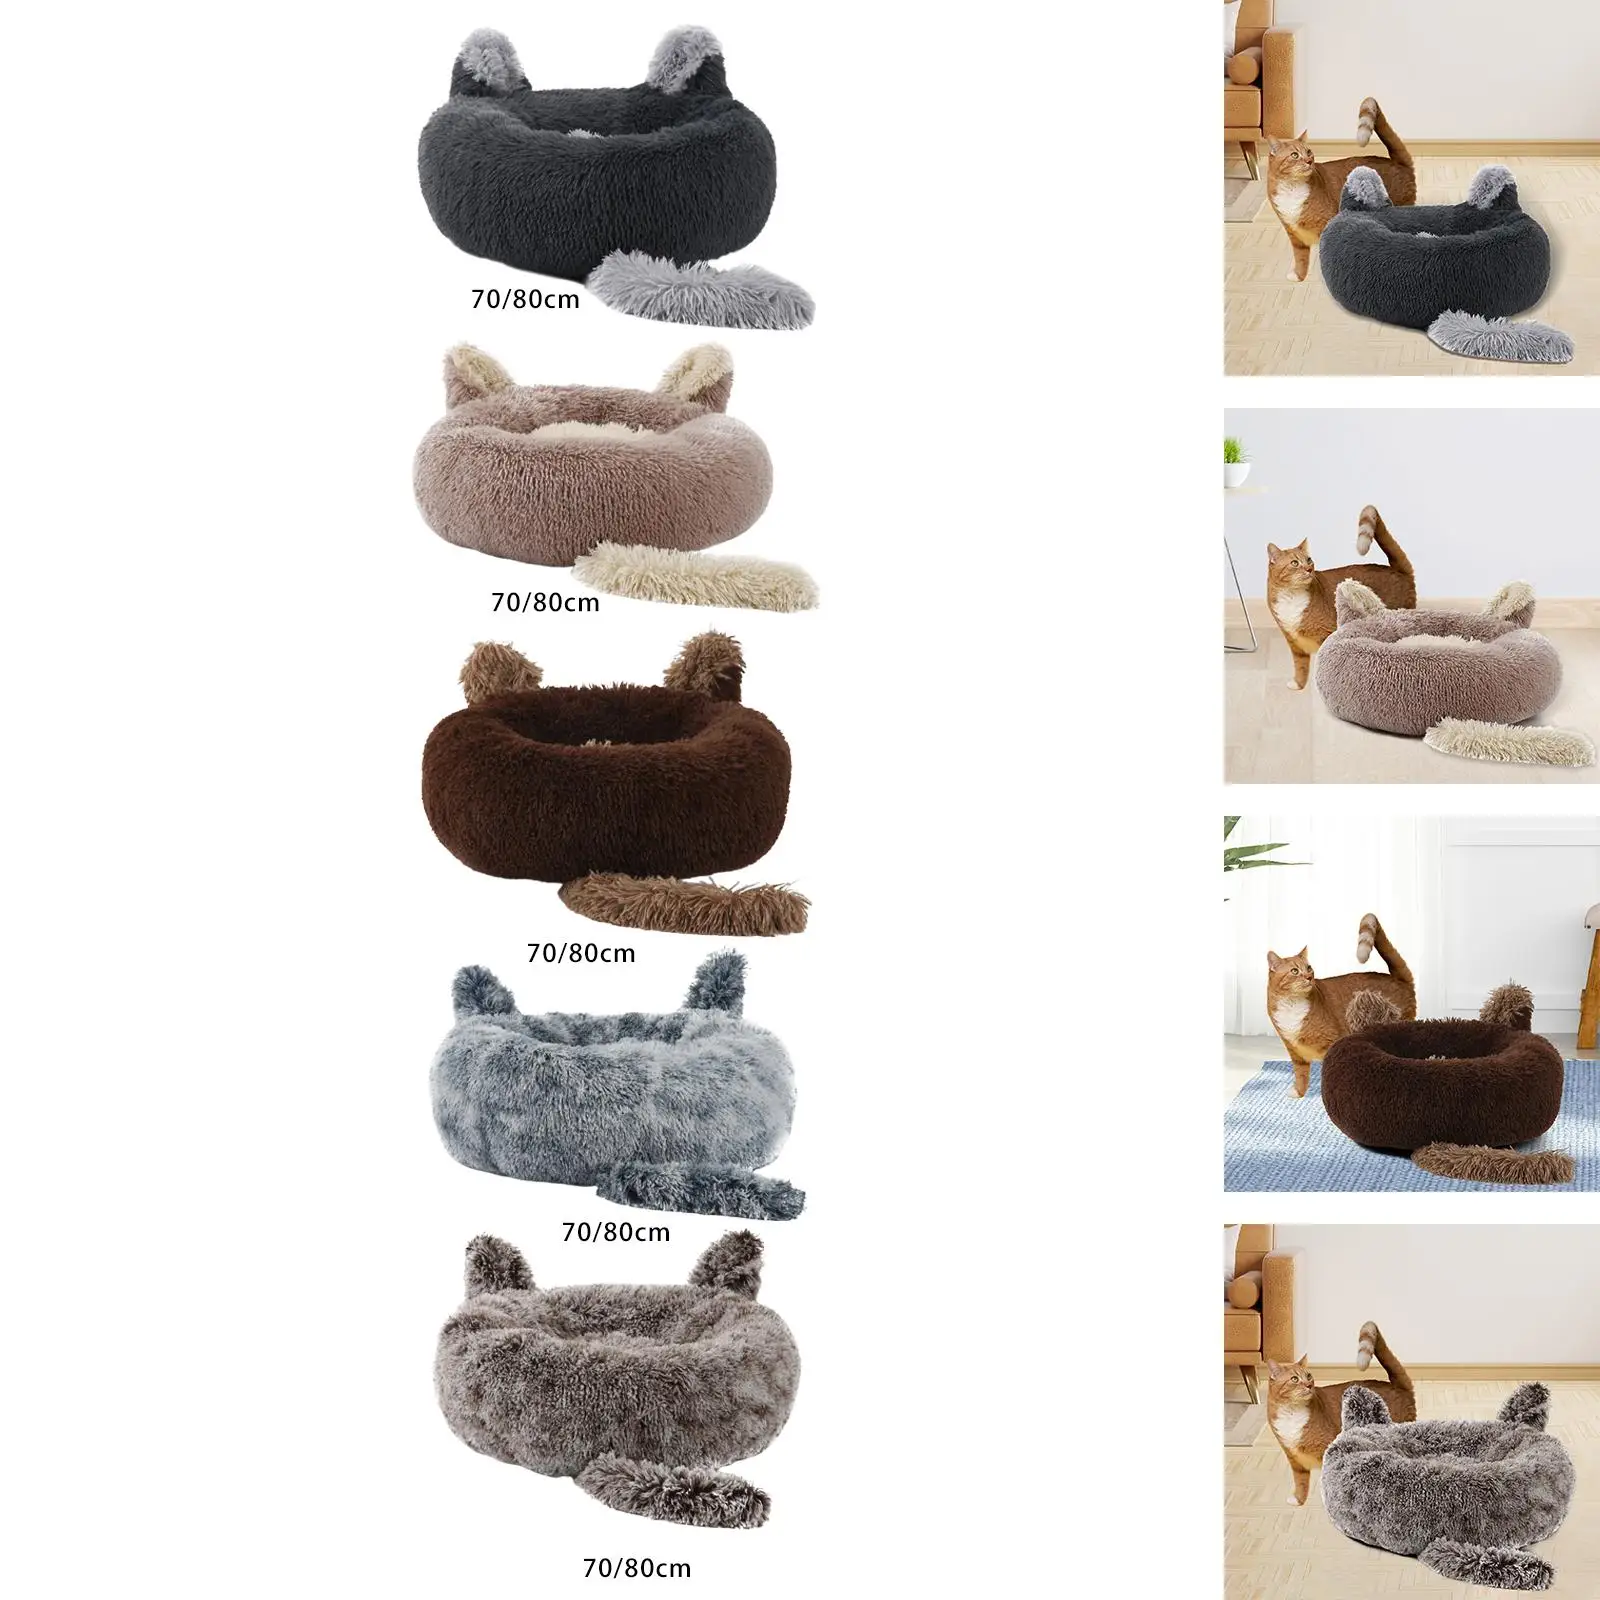 Round Pet Blanket Dog Bed Anti Slip Bottom Nest Washable Soft Comfortable Hut Cat Warm House for Kitty Rest Playing Kitten Puppy